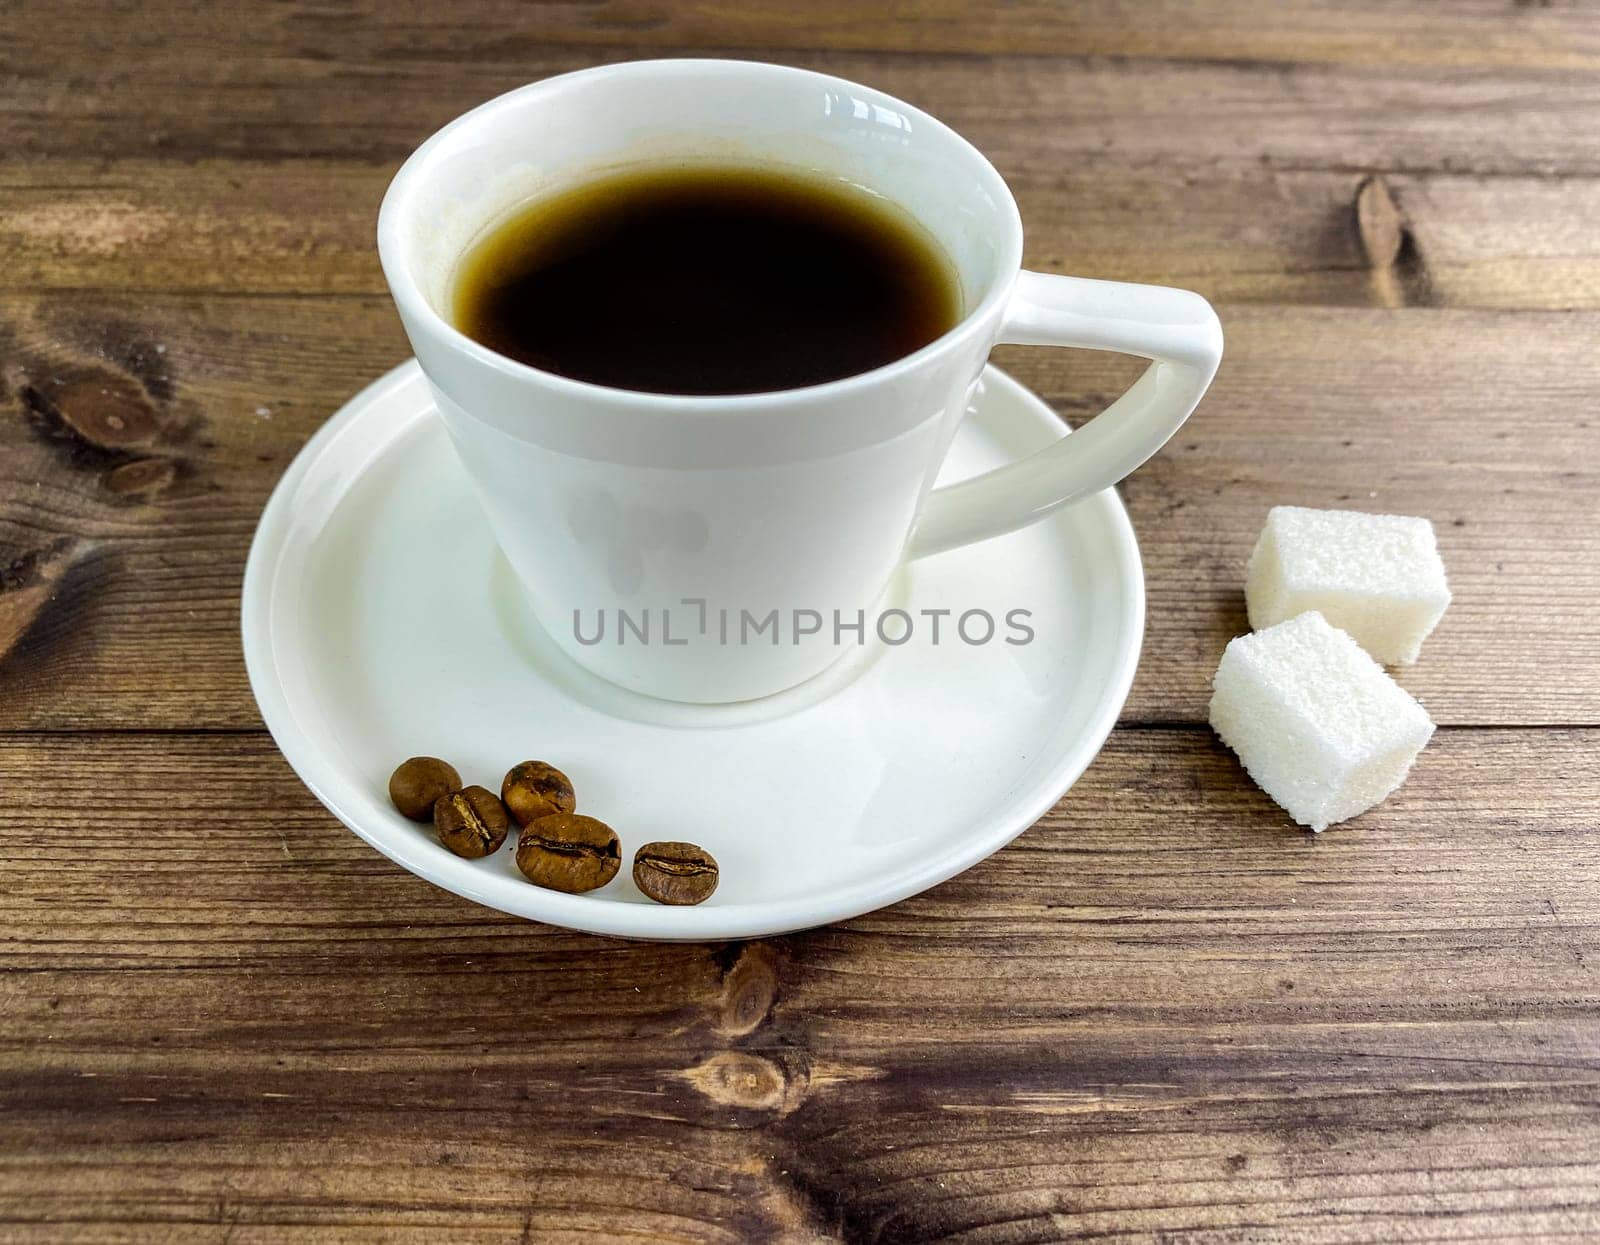 Coffee in a cup and sugar on the table. Coffee in a cup with saucers and sugar on a wooden table.